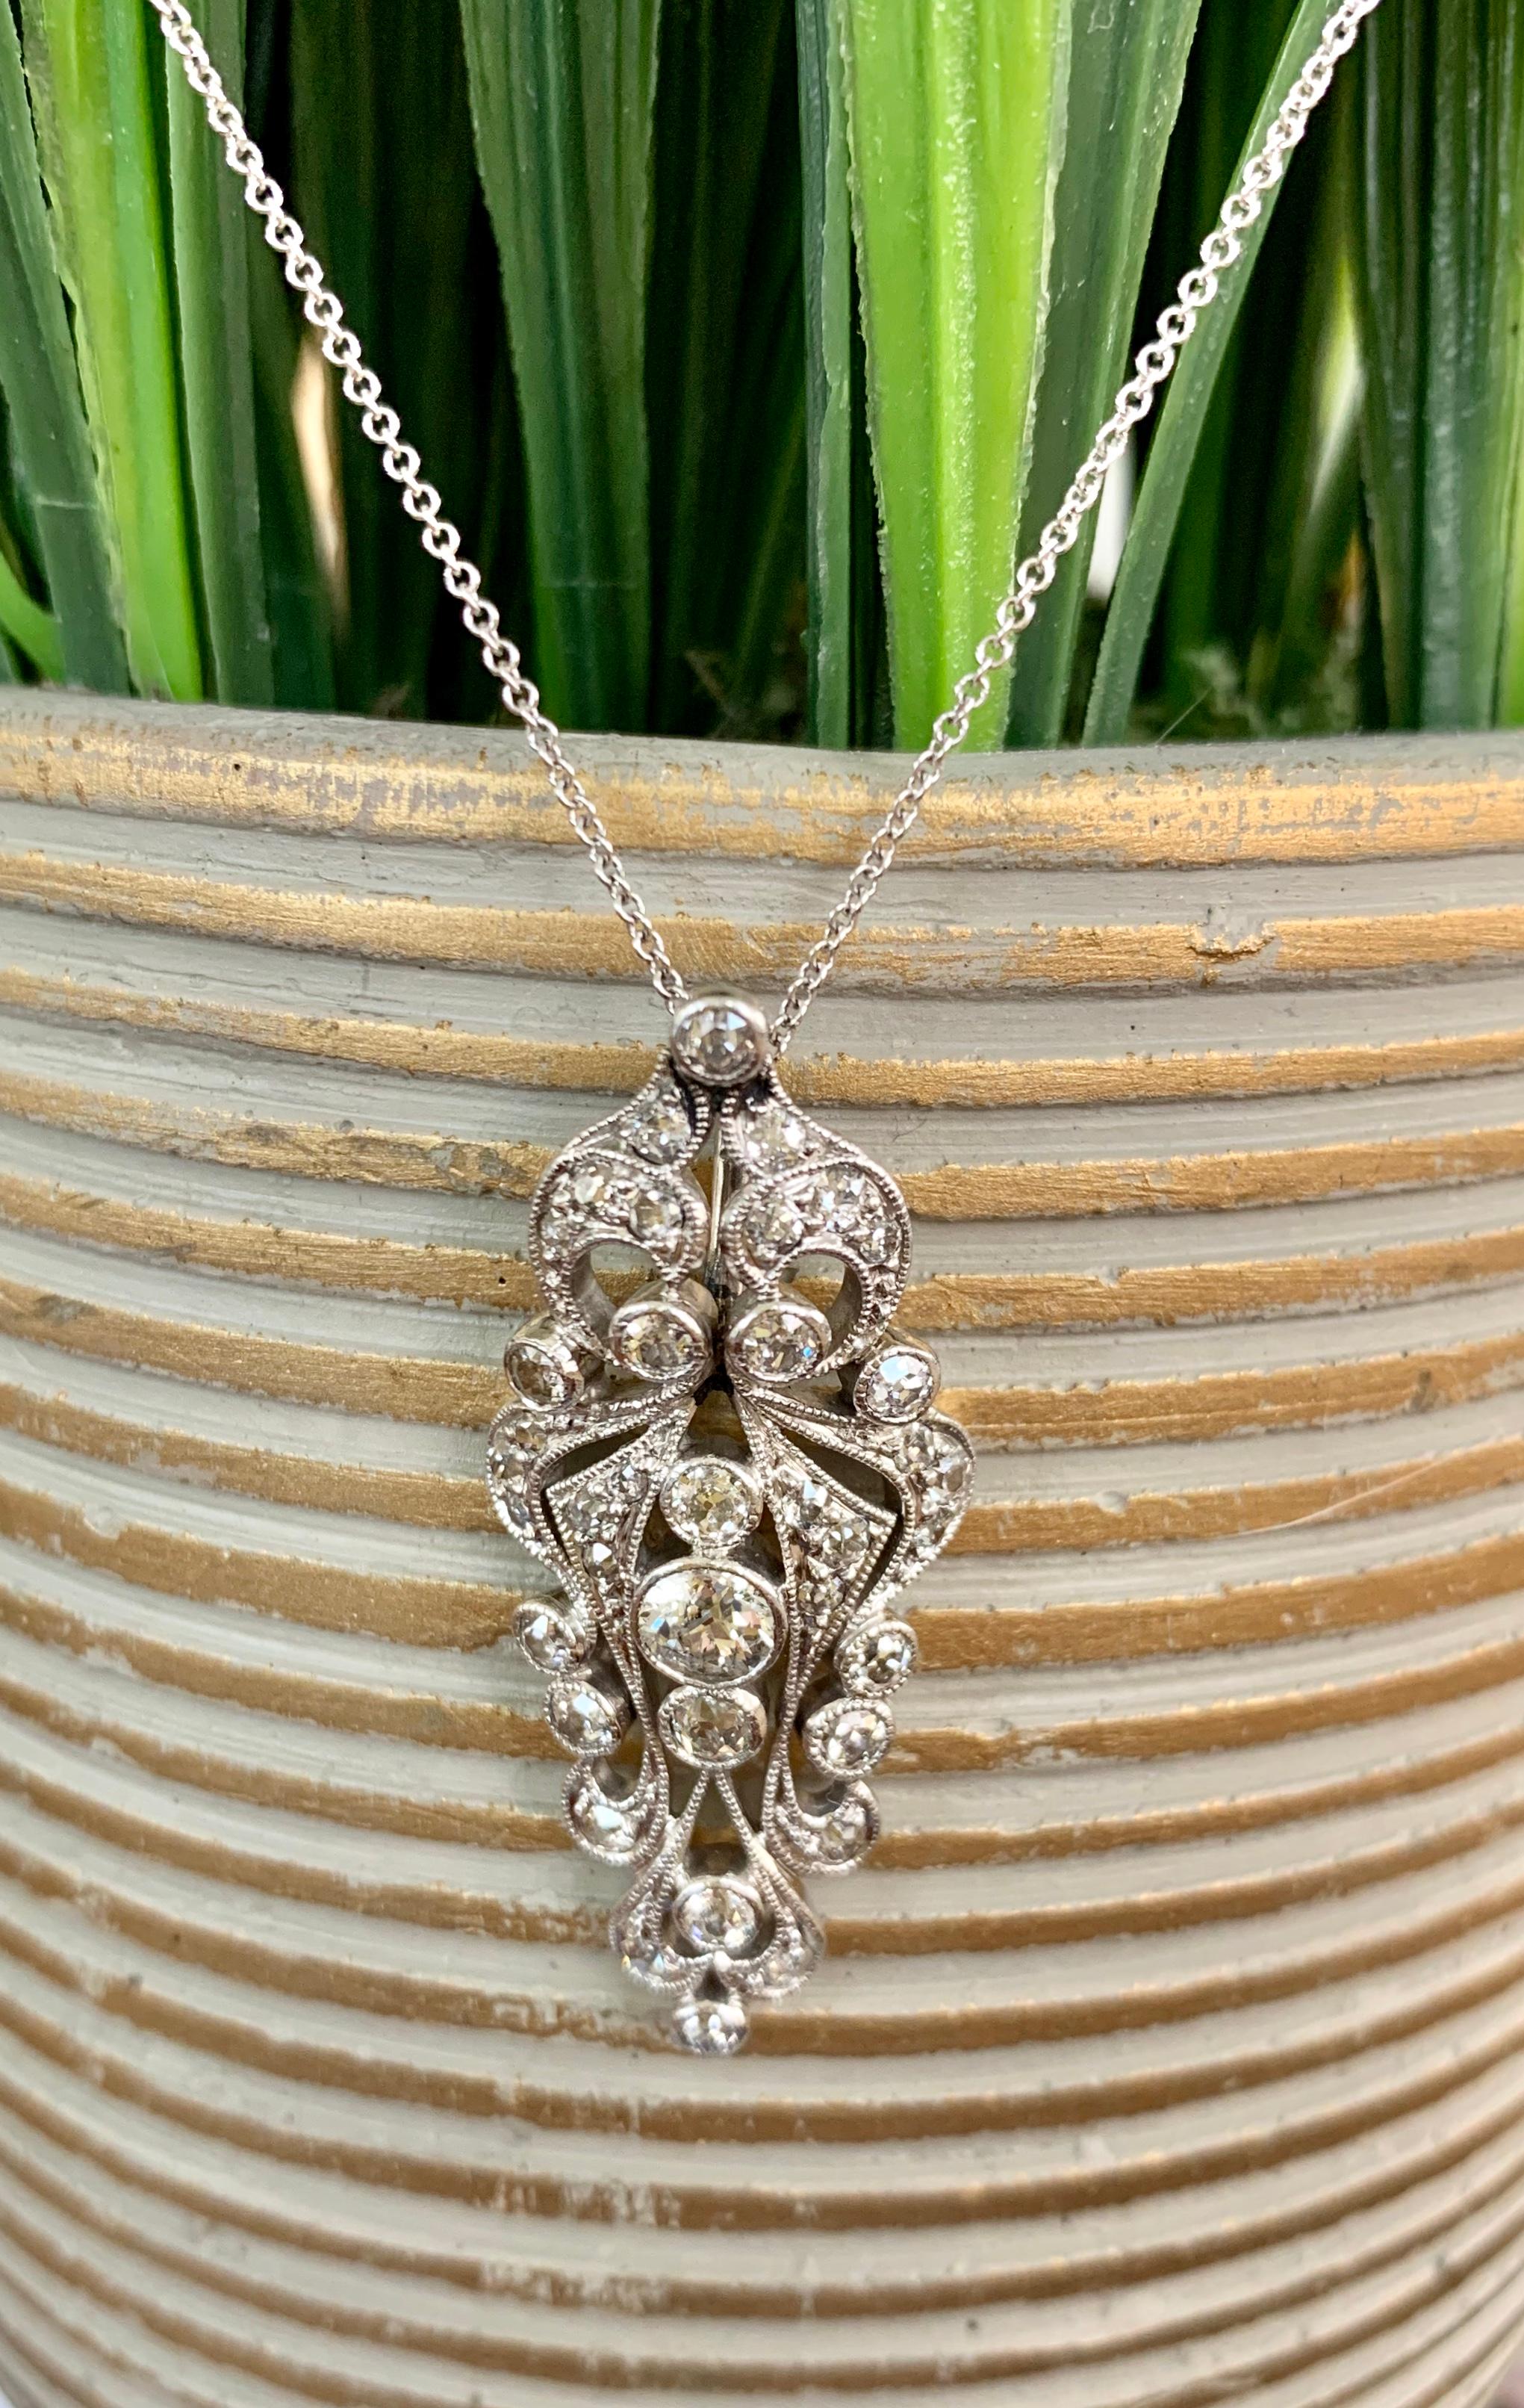 Antique Euro Cut Diamond Platinum Pendant and 14 Karat White Gold Chain In Good Condition For Sale In St. Louis Park, MN